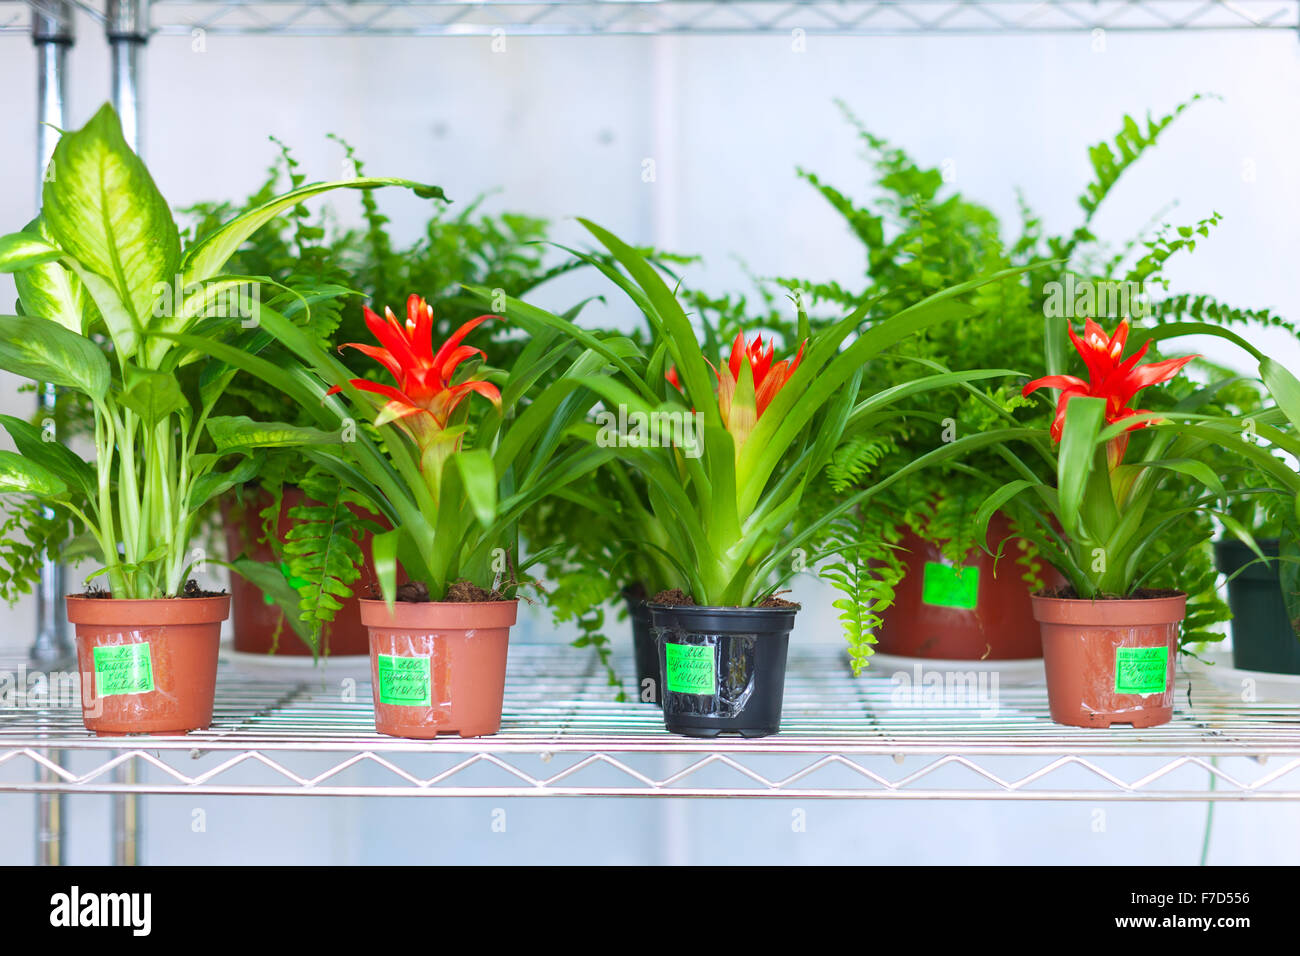 Shelves with Guzmania and Dieffenbachia in pots in flower shop Stock Photo